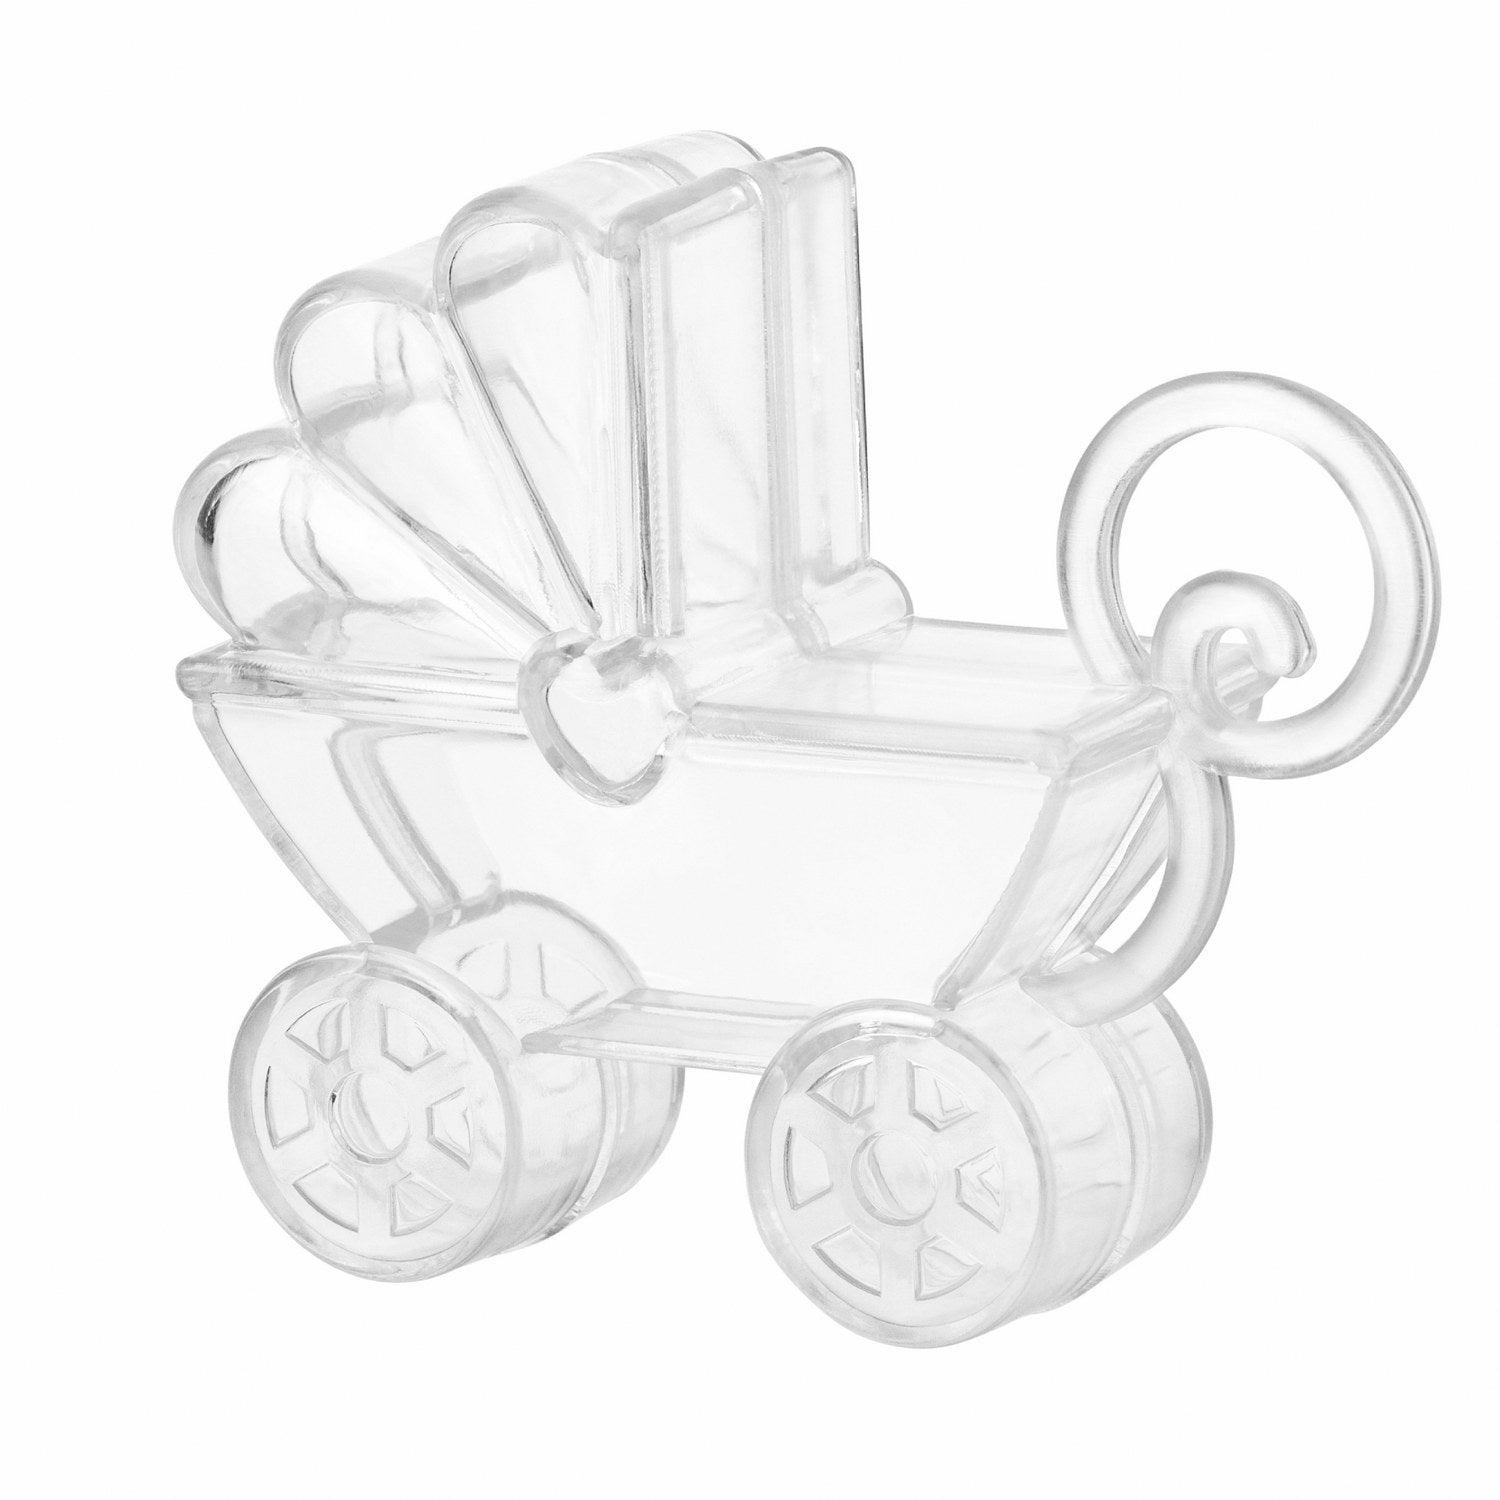 Baby Carriage Shaped Acrylic Candy Boxes 24 Pack 2.75"X2.75"X0.71" | Amazing Pinatas 